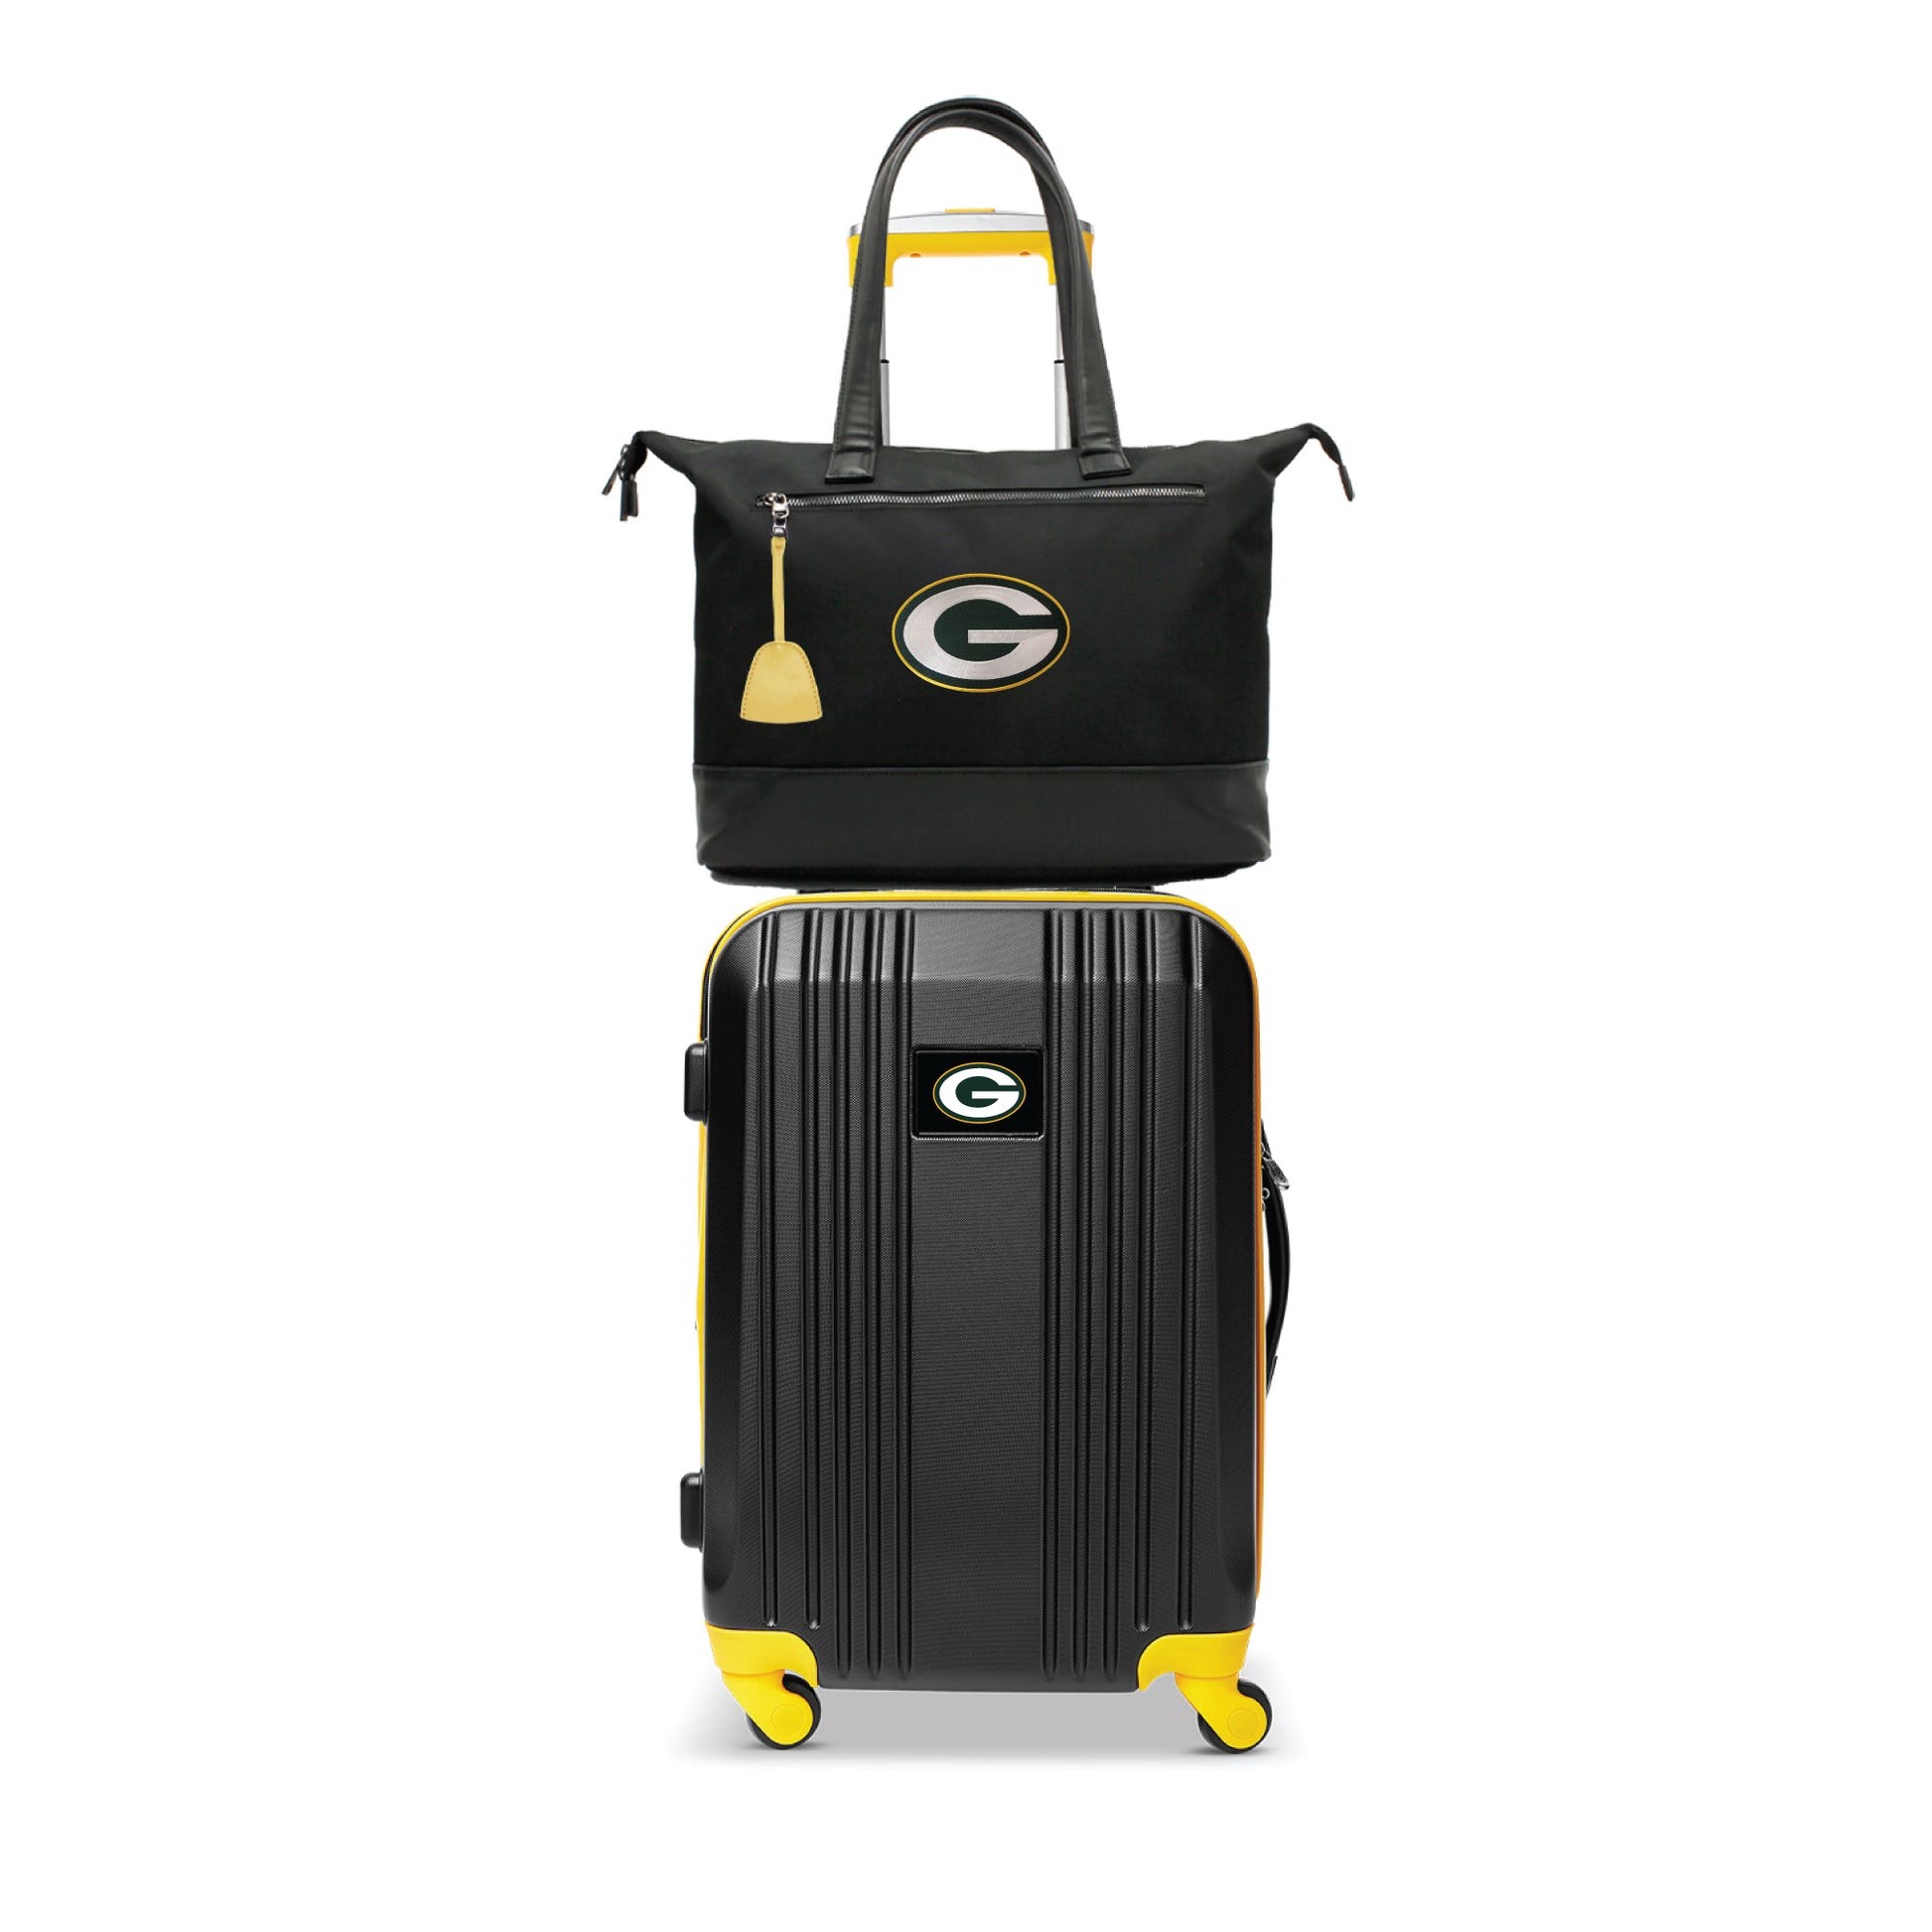 Green Bay Packers Premium Laptop Tote Bag and Luggage Set